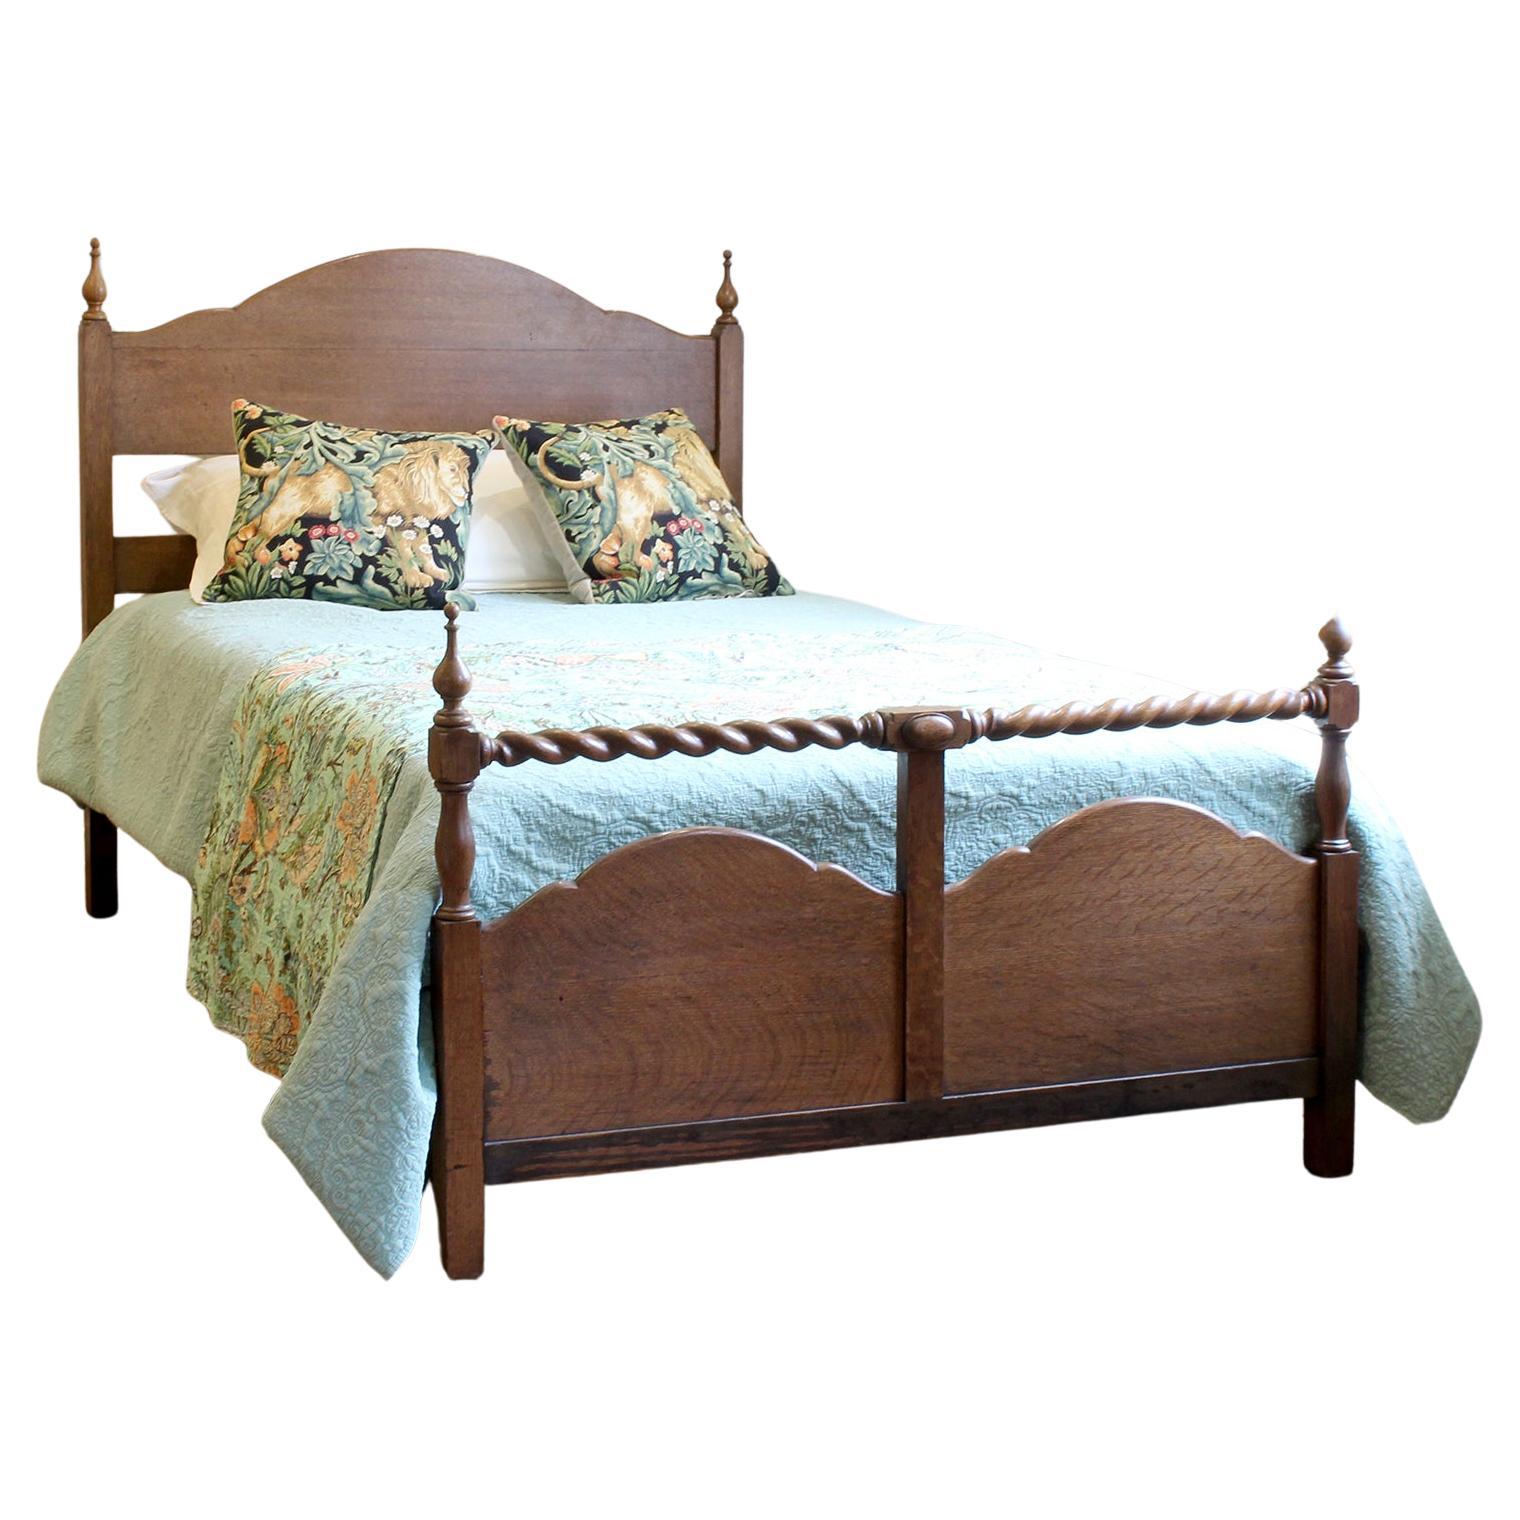 Small Double Oak Antique Bed - WD57